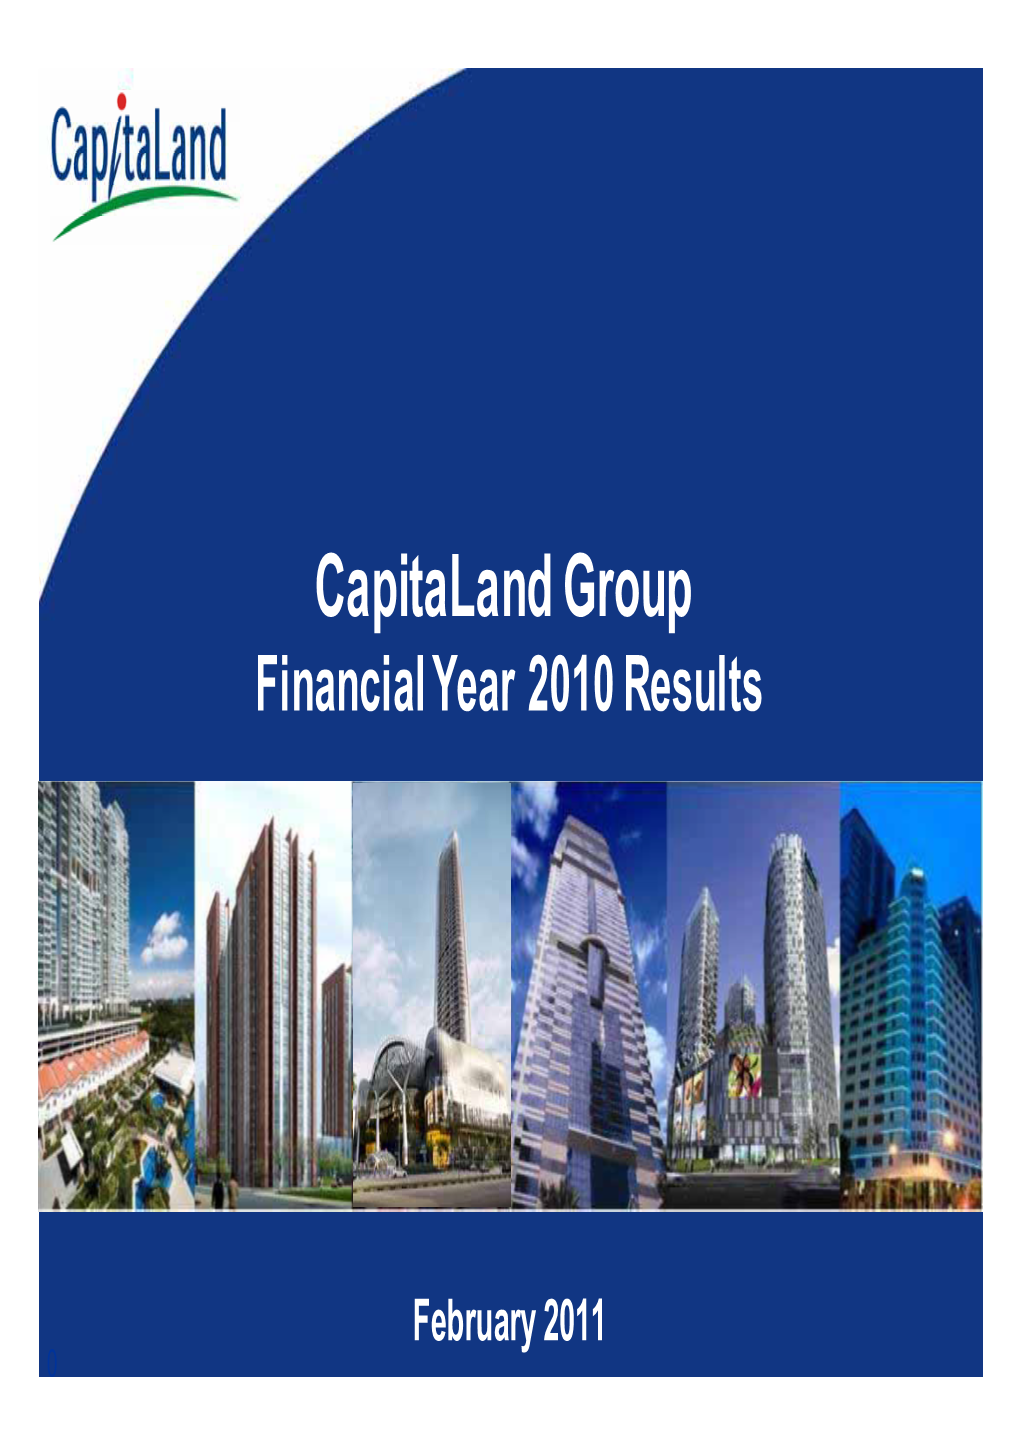 Capitaland Group Financial Year 2010 Results